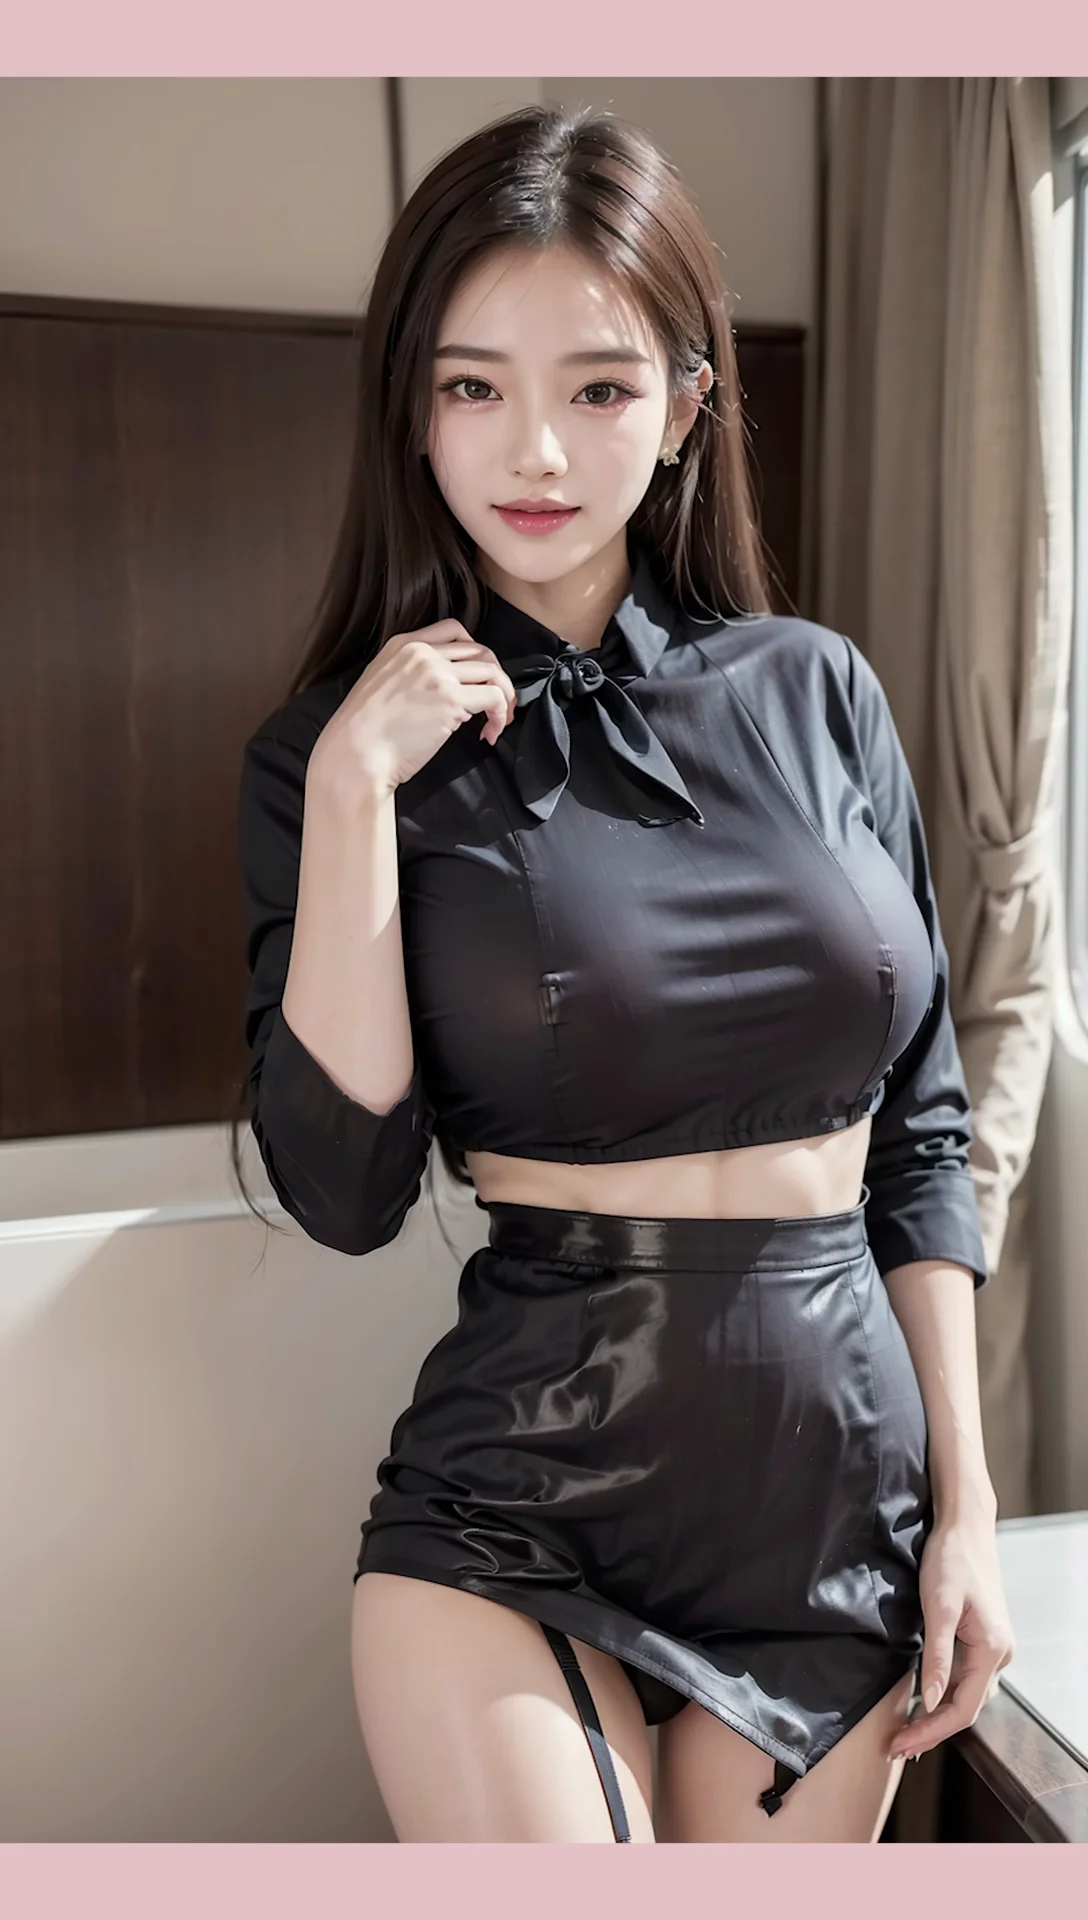 Ai Lookbook: Sexy Office Woman Images 35